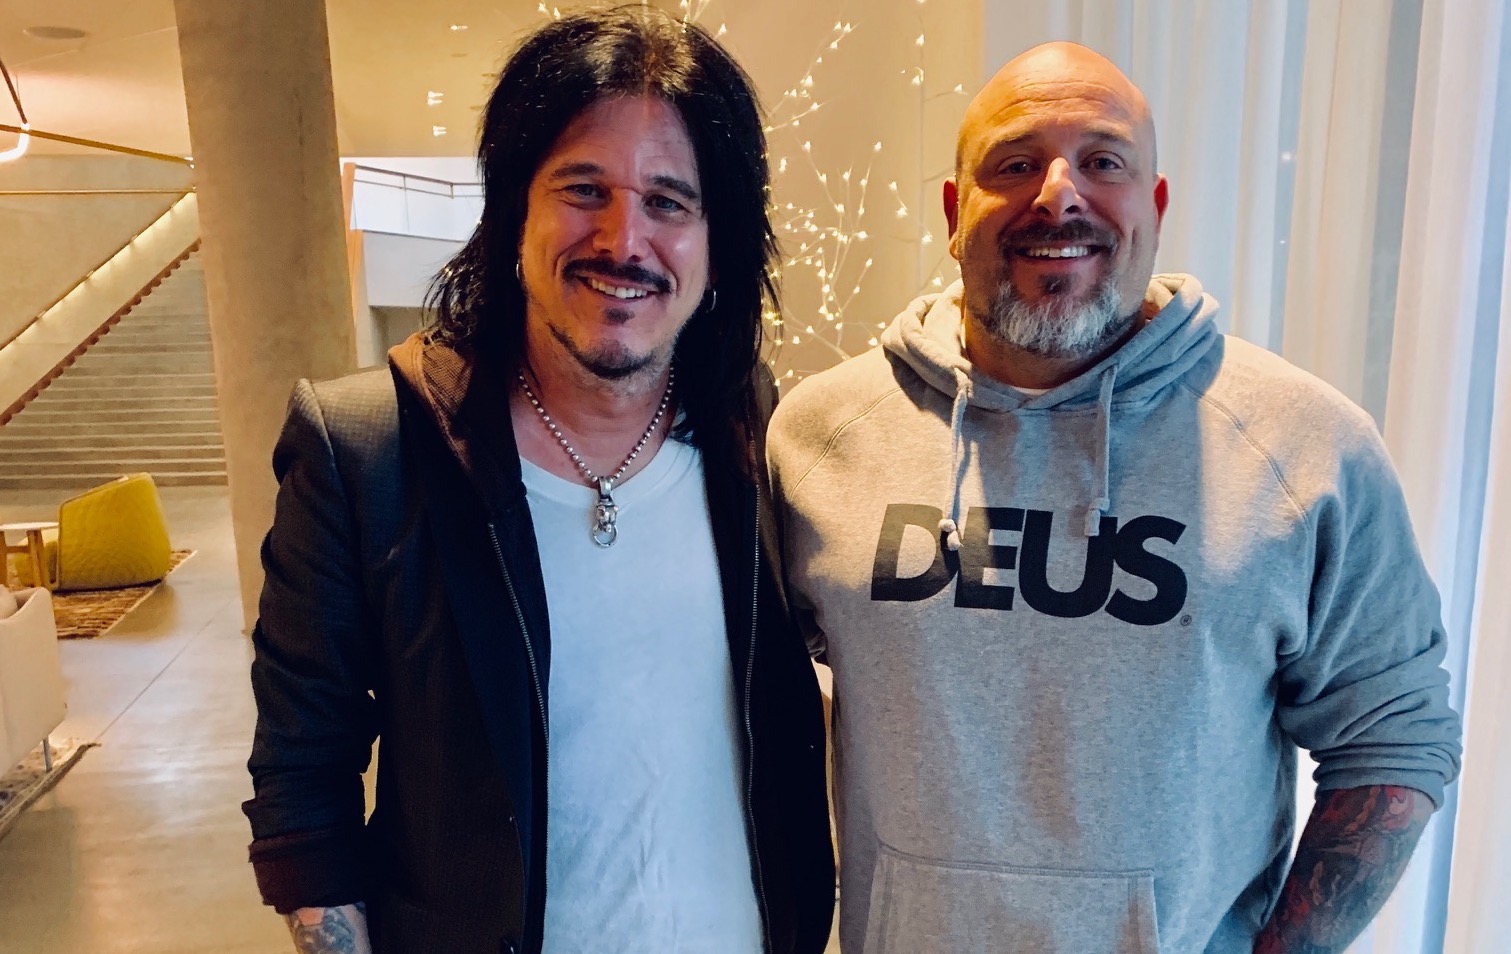 Golden Robot signs former Gunners guitarist Gilby Clarke: “We’ll turn rock and roll up loud!”